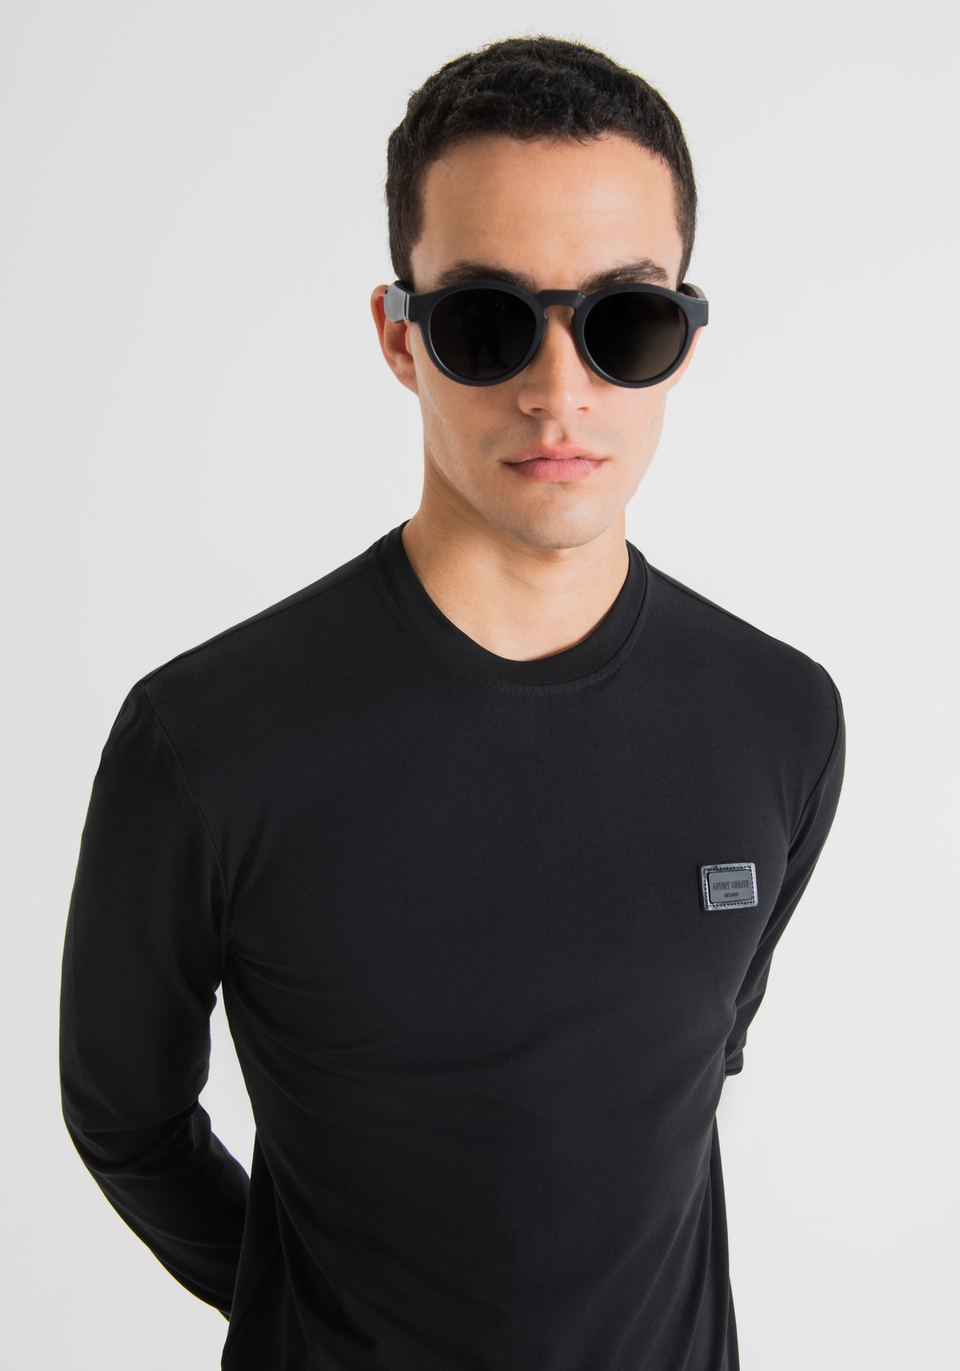 SUPER SLIM-FIT SWEATER IN SOFT COTTON JERSEY WITH LOGO TAB - Antony Morato Online Shop